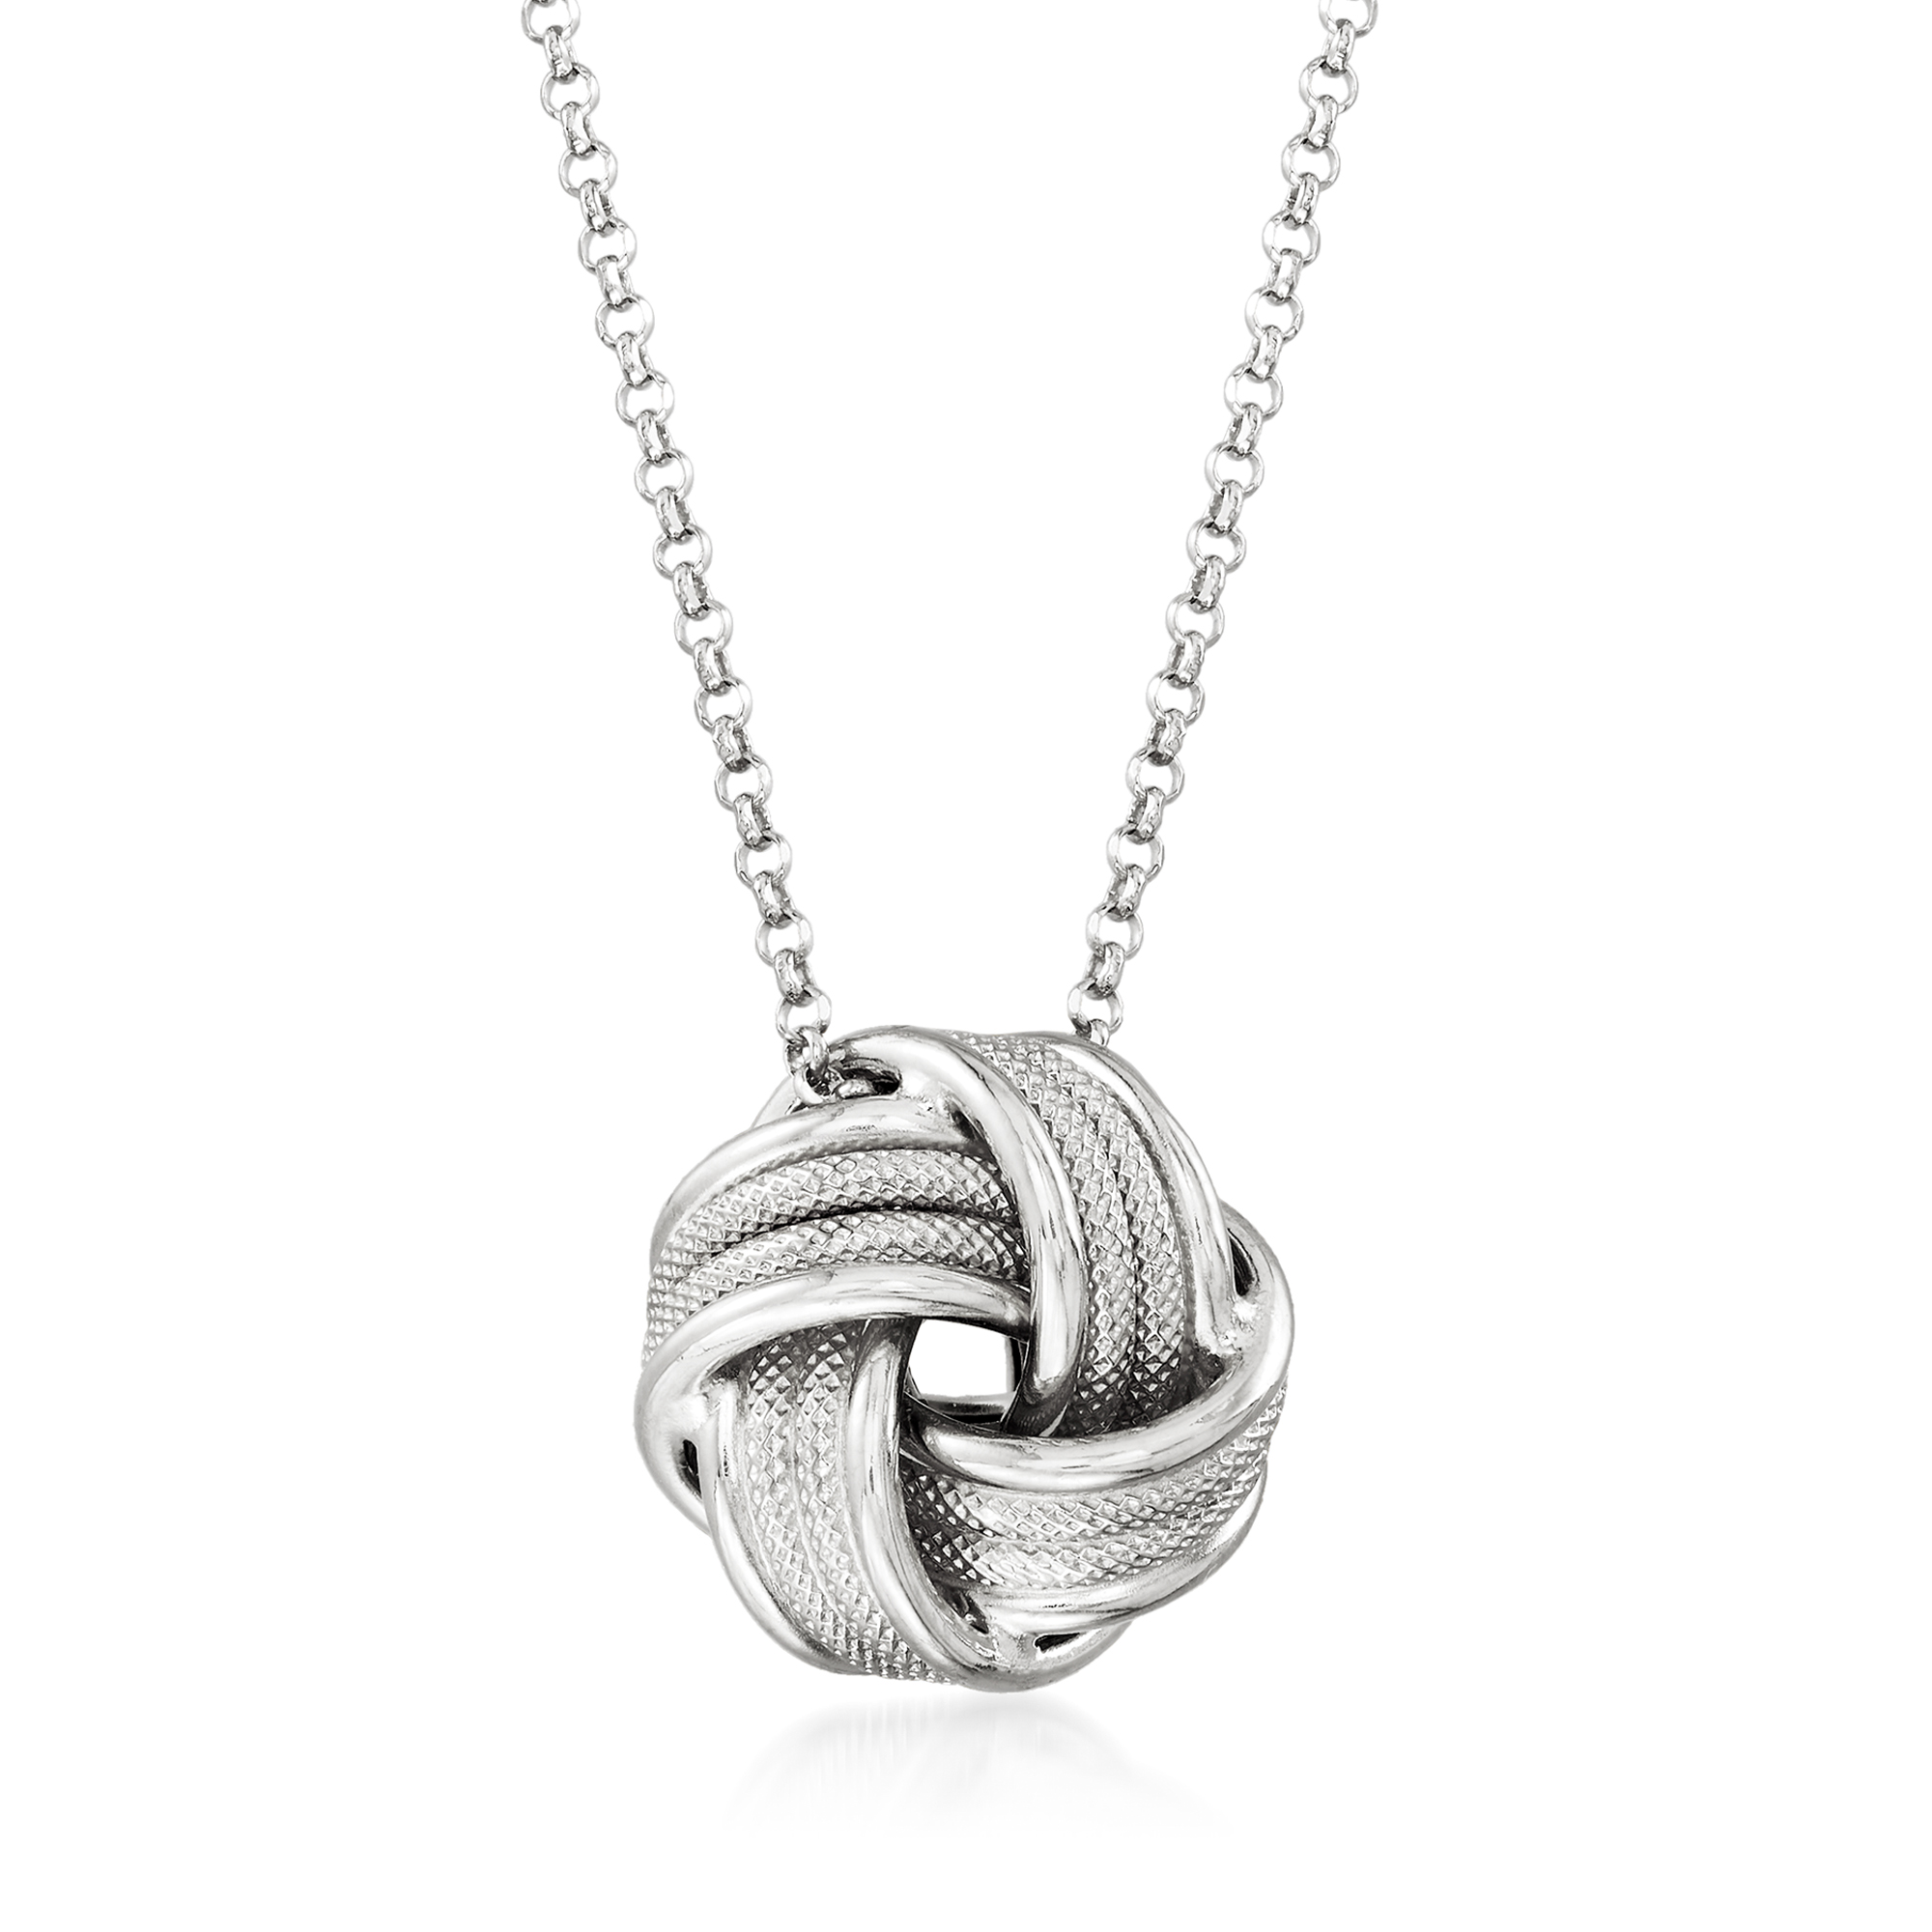 Ross Simons Necklaces On Sale Flash Sales, 58% OFF | www 